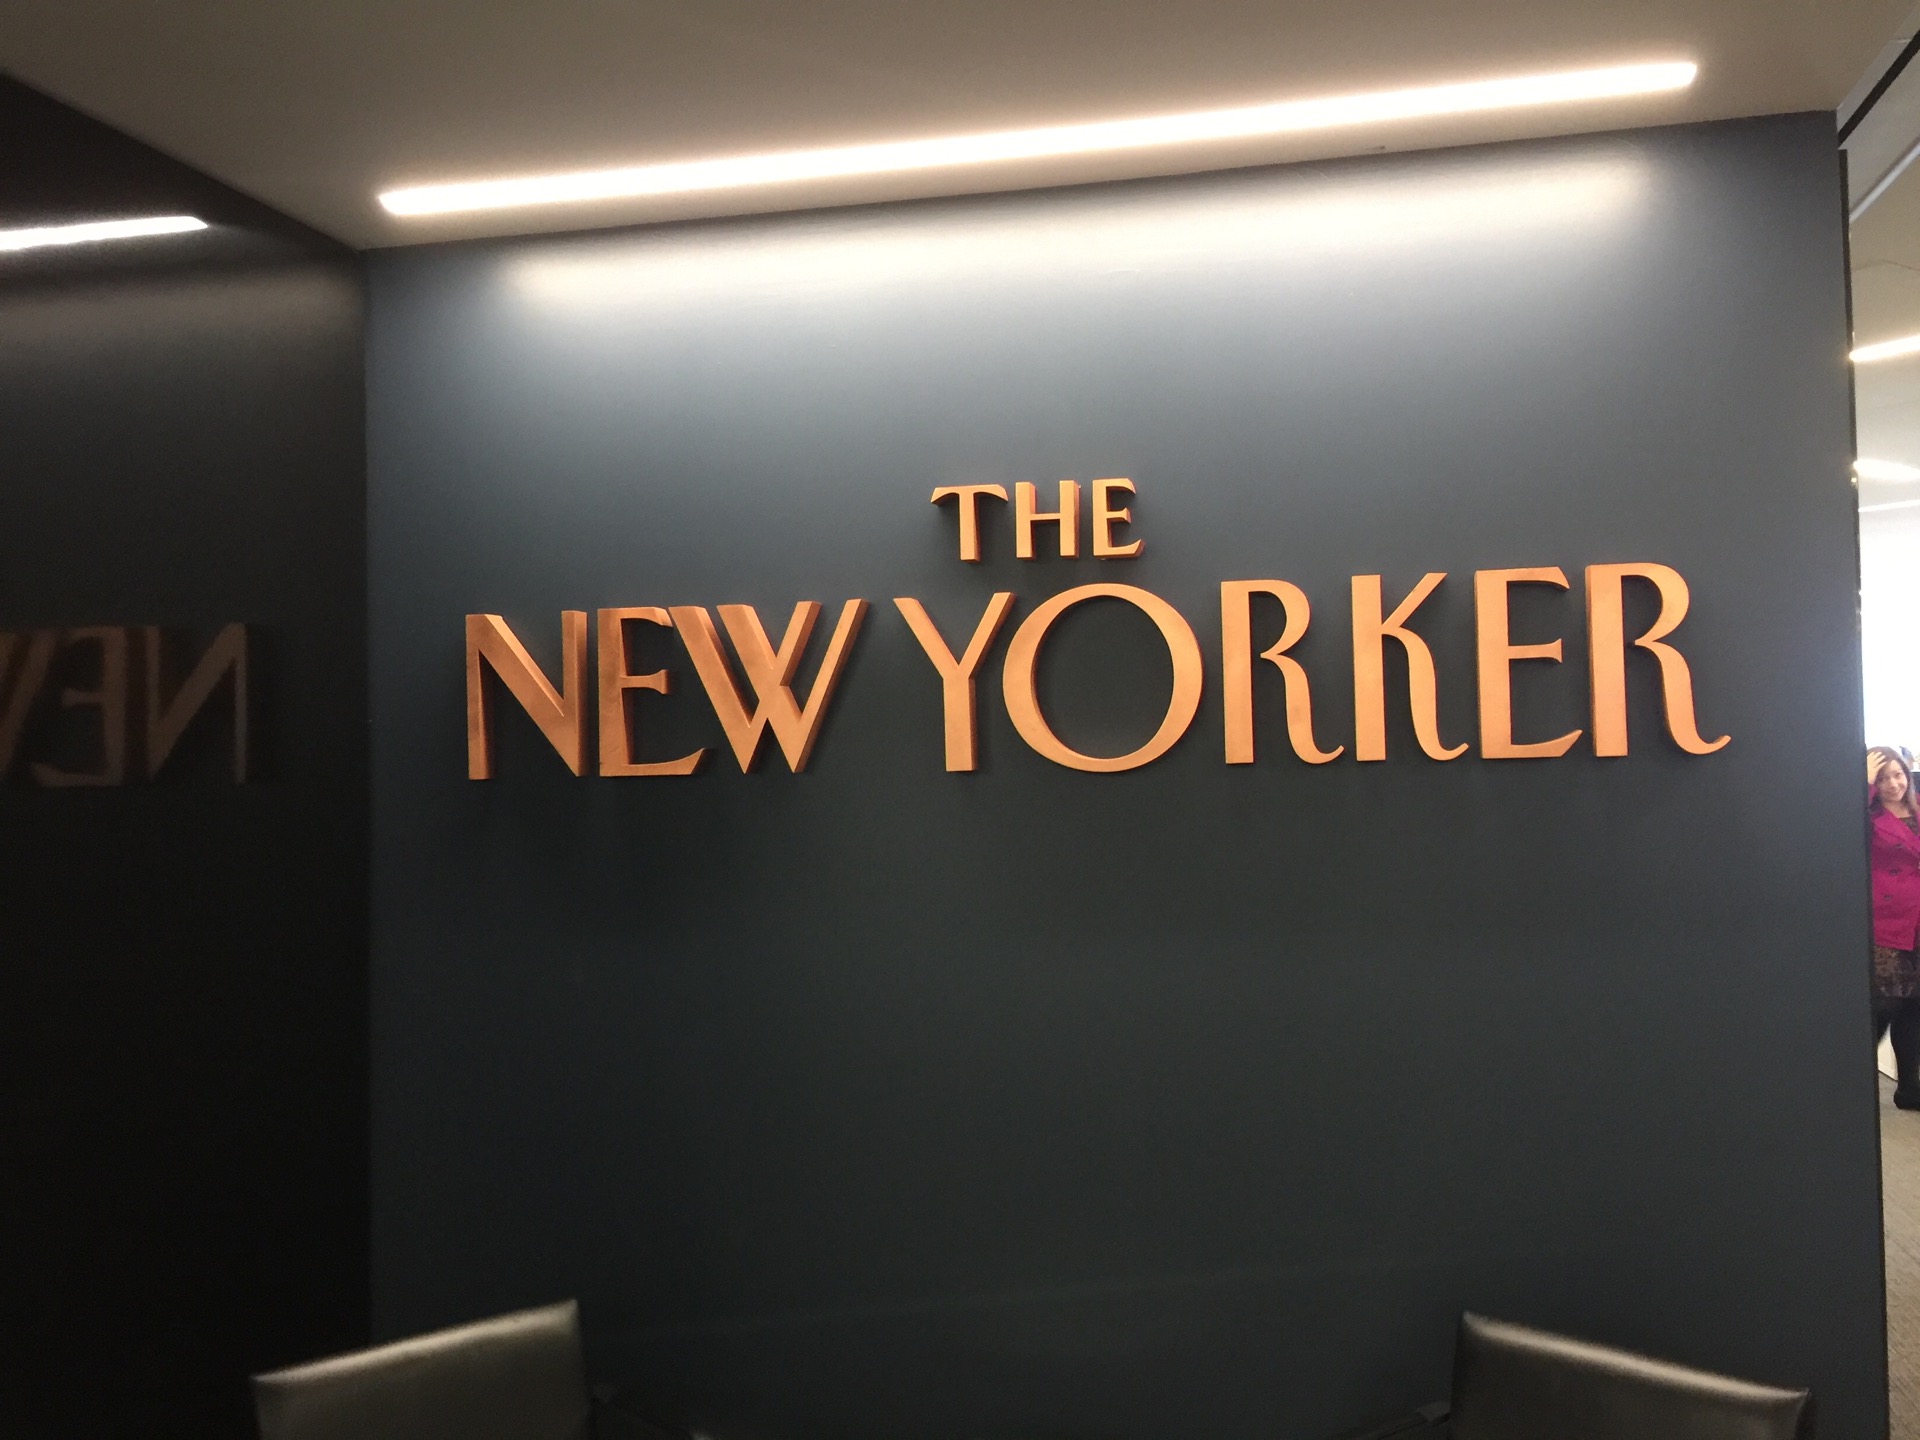 Checked in at The New Yorker